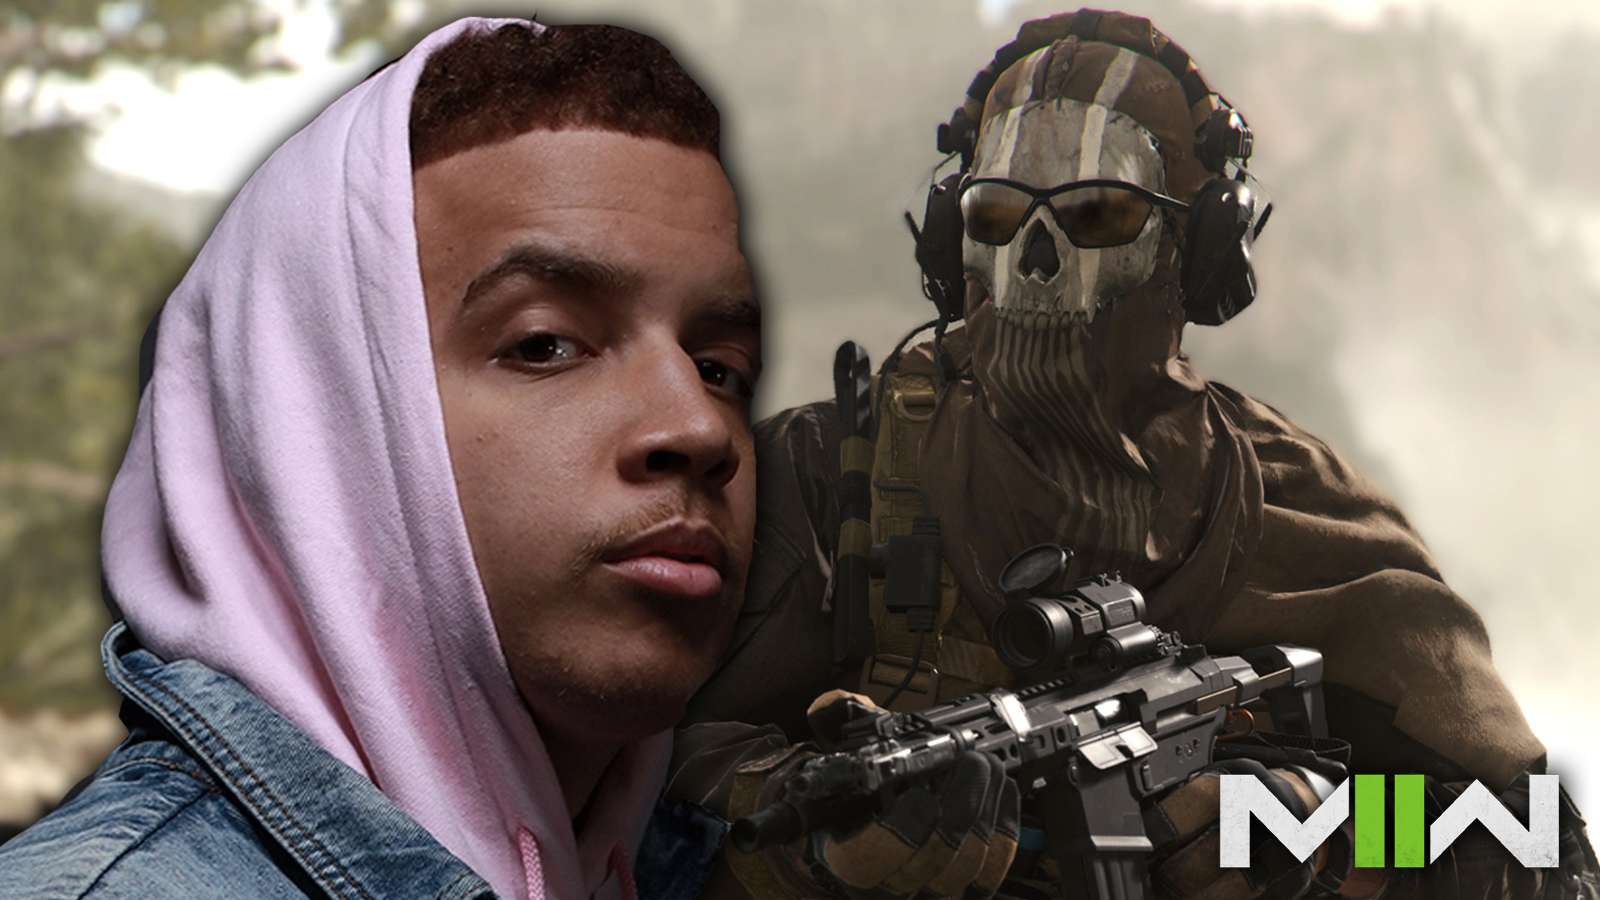 an image of faze swagg and warzone 2